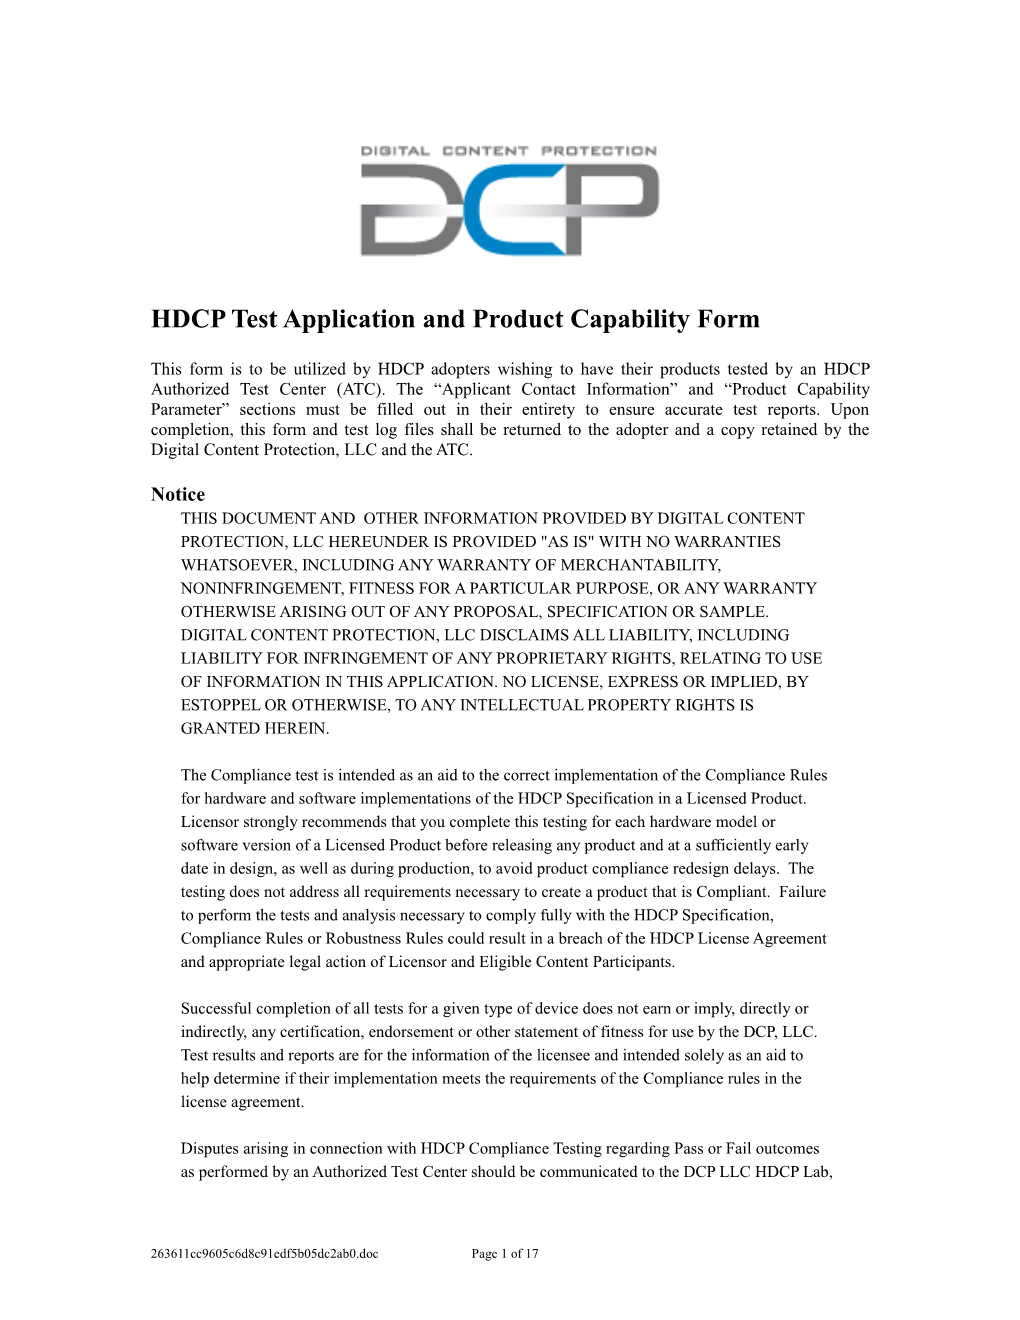 Product Capability Parameter (PCP)